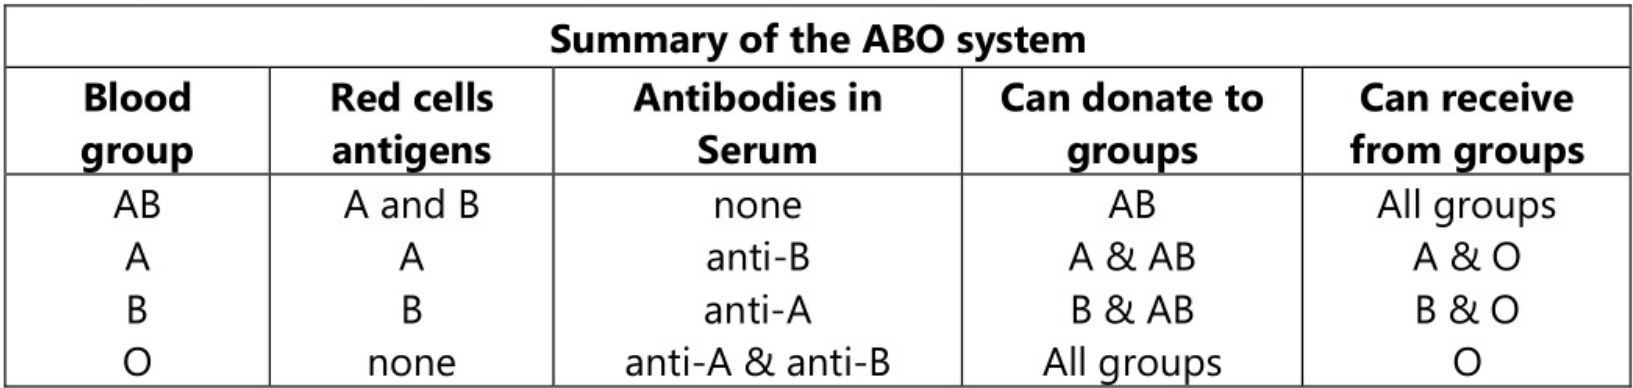 ABO system blood groups